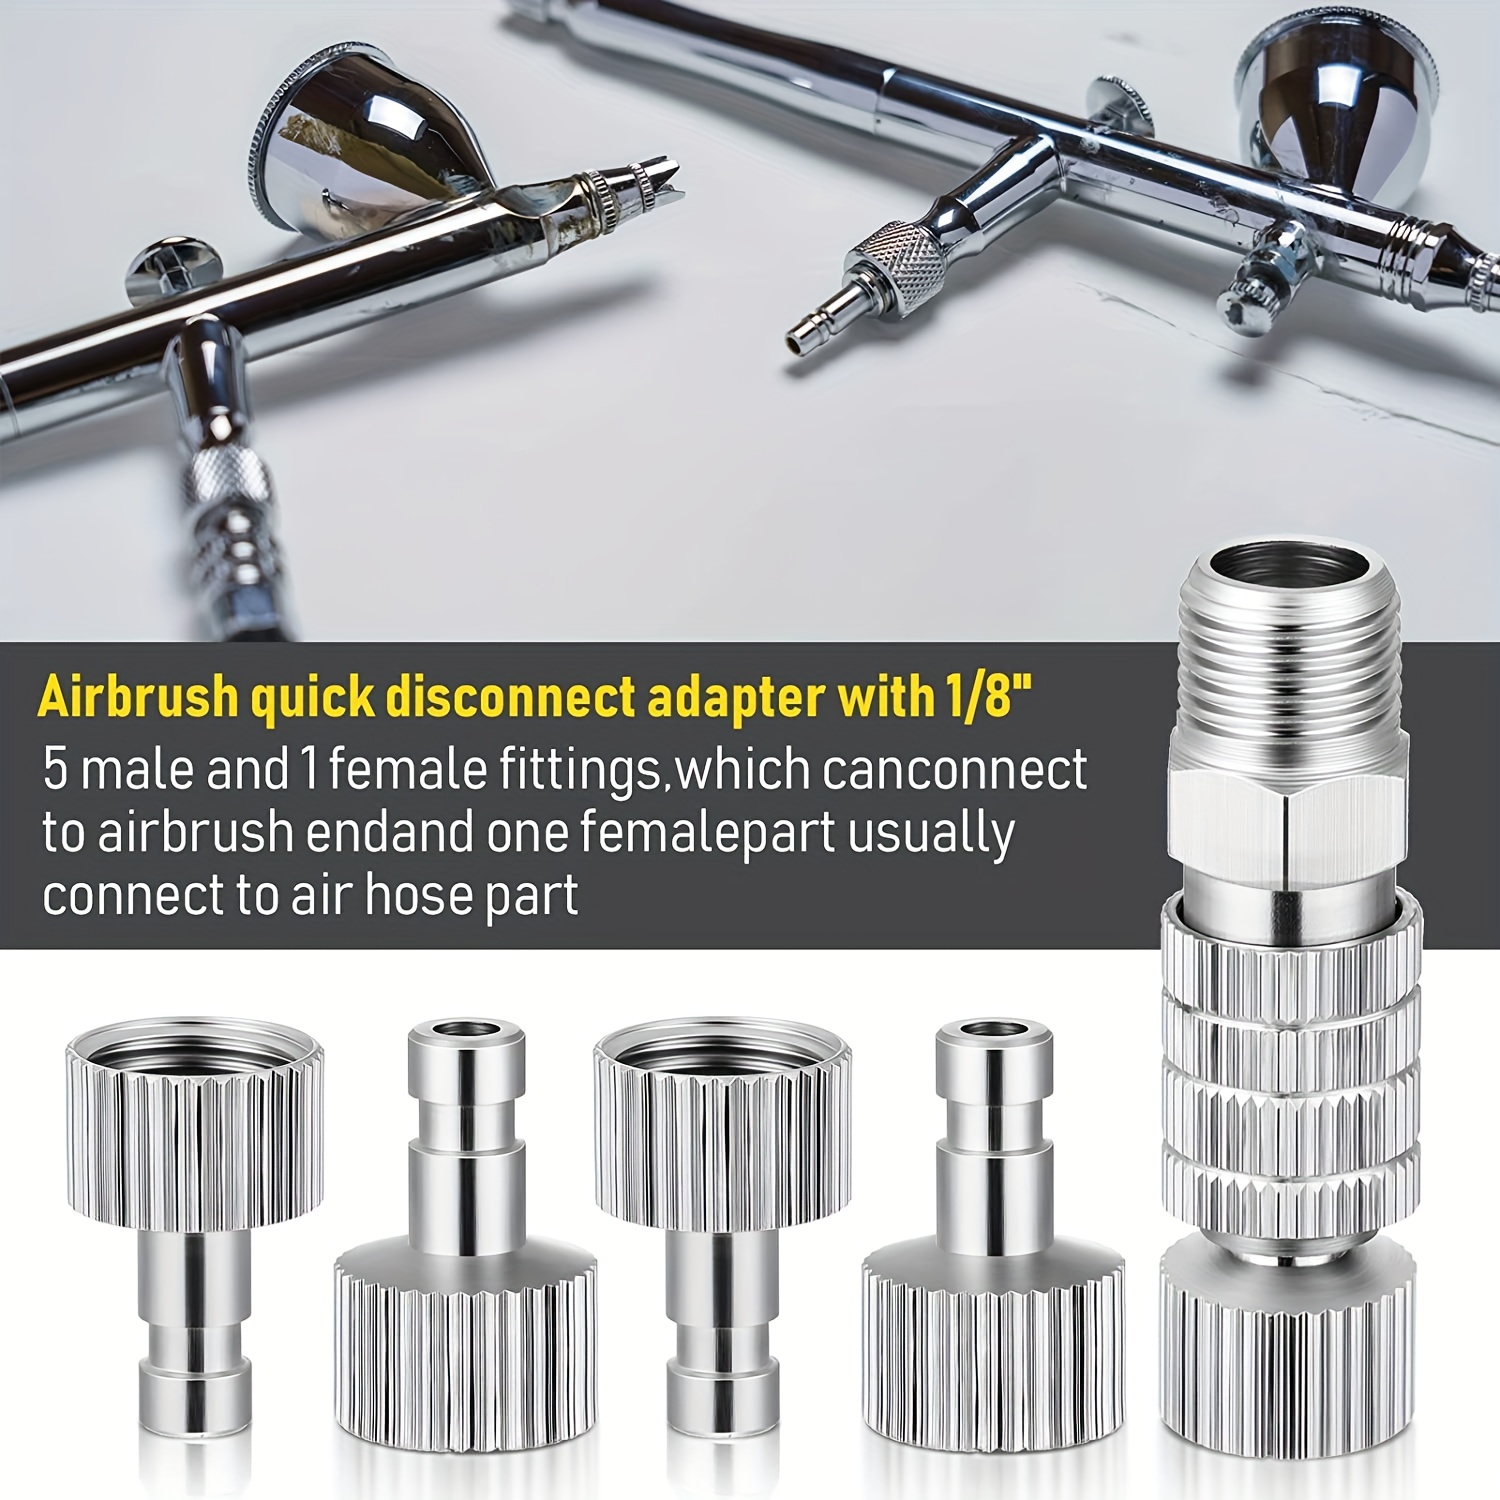 TimberTech Airbrush Quick Release Disconnect with 4pcs G1/8 Male Fittings and Female Hose Connection for Airbrush and Air HO